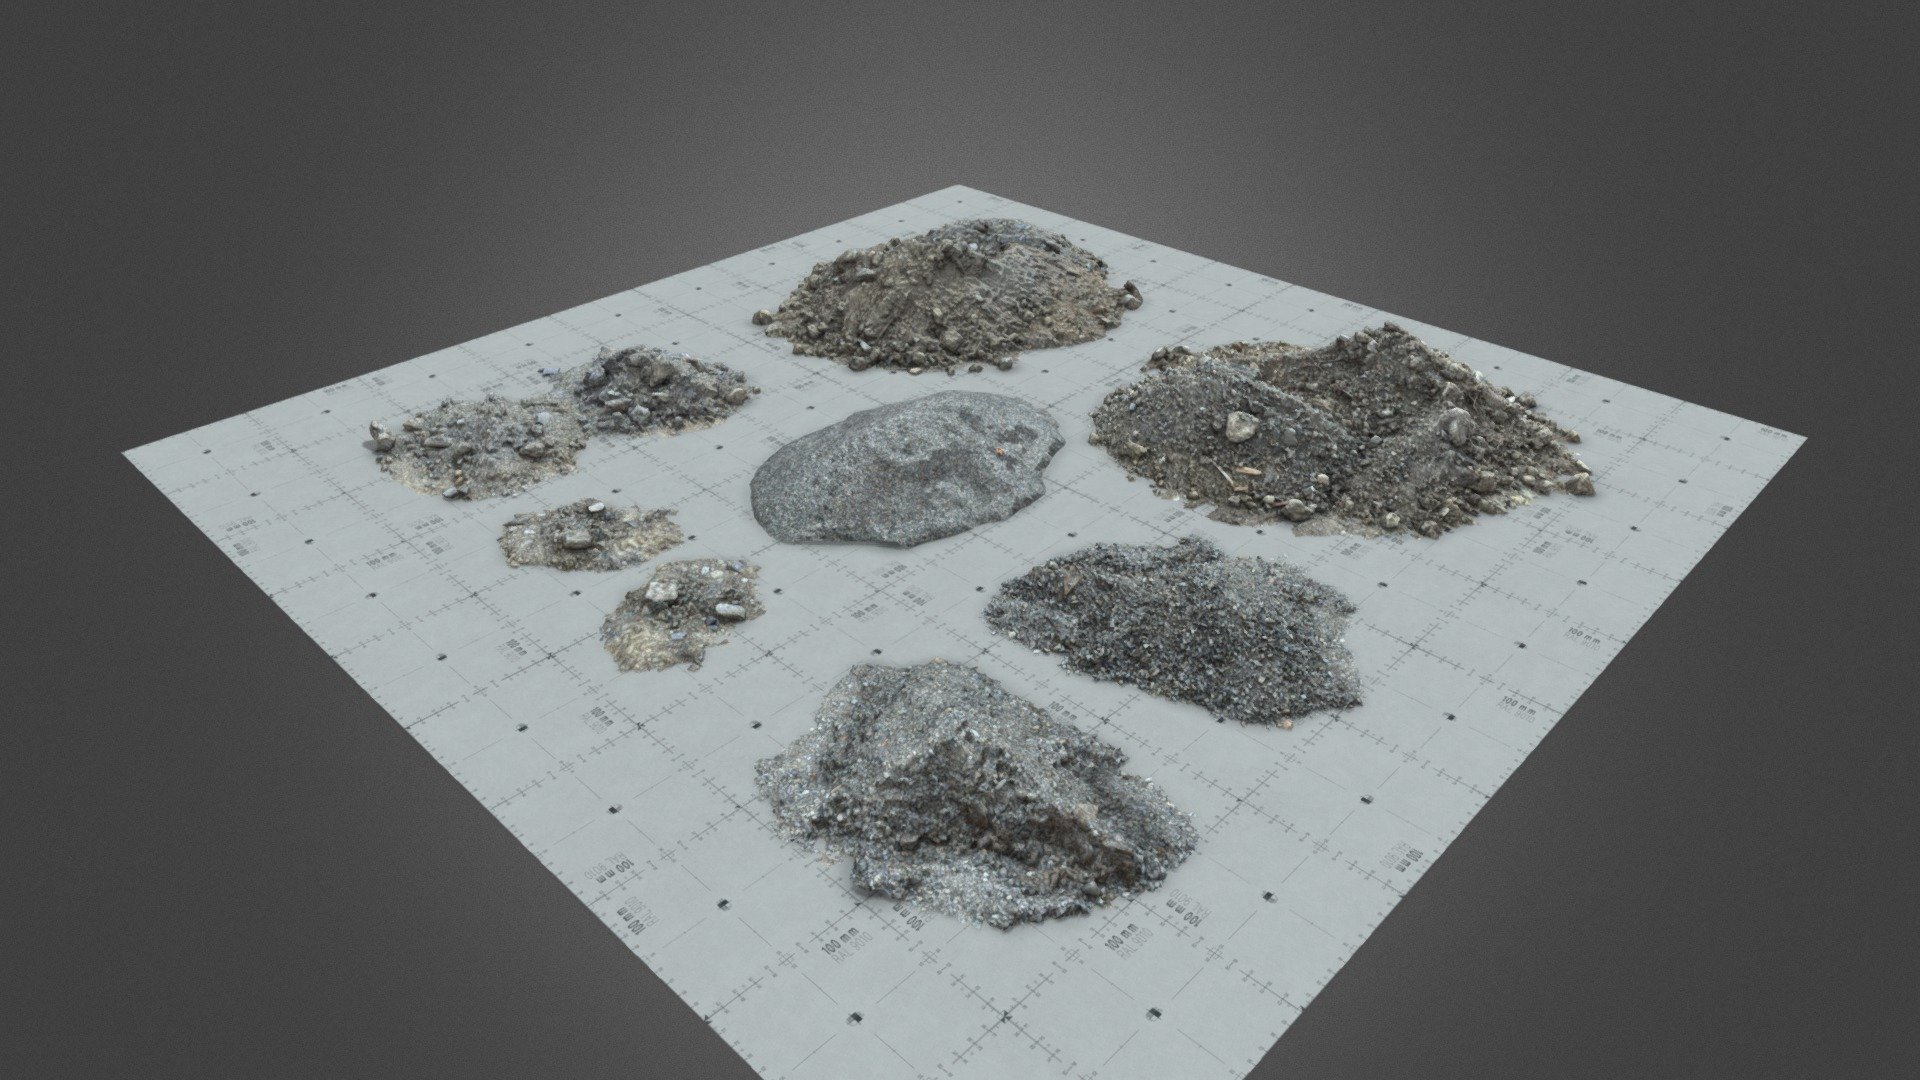 Piles of Debris and Stones
A set of assets that will help you quickly increase attractiveness and easily add details to your scene. Models have been optimized for easy use in all 3D programs and game engines. It includes high-quality, photoscanned models, in various variants, and textures in 4K resolution. Some models available in to variants; low poly and high poly 3d model